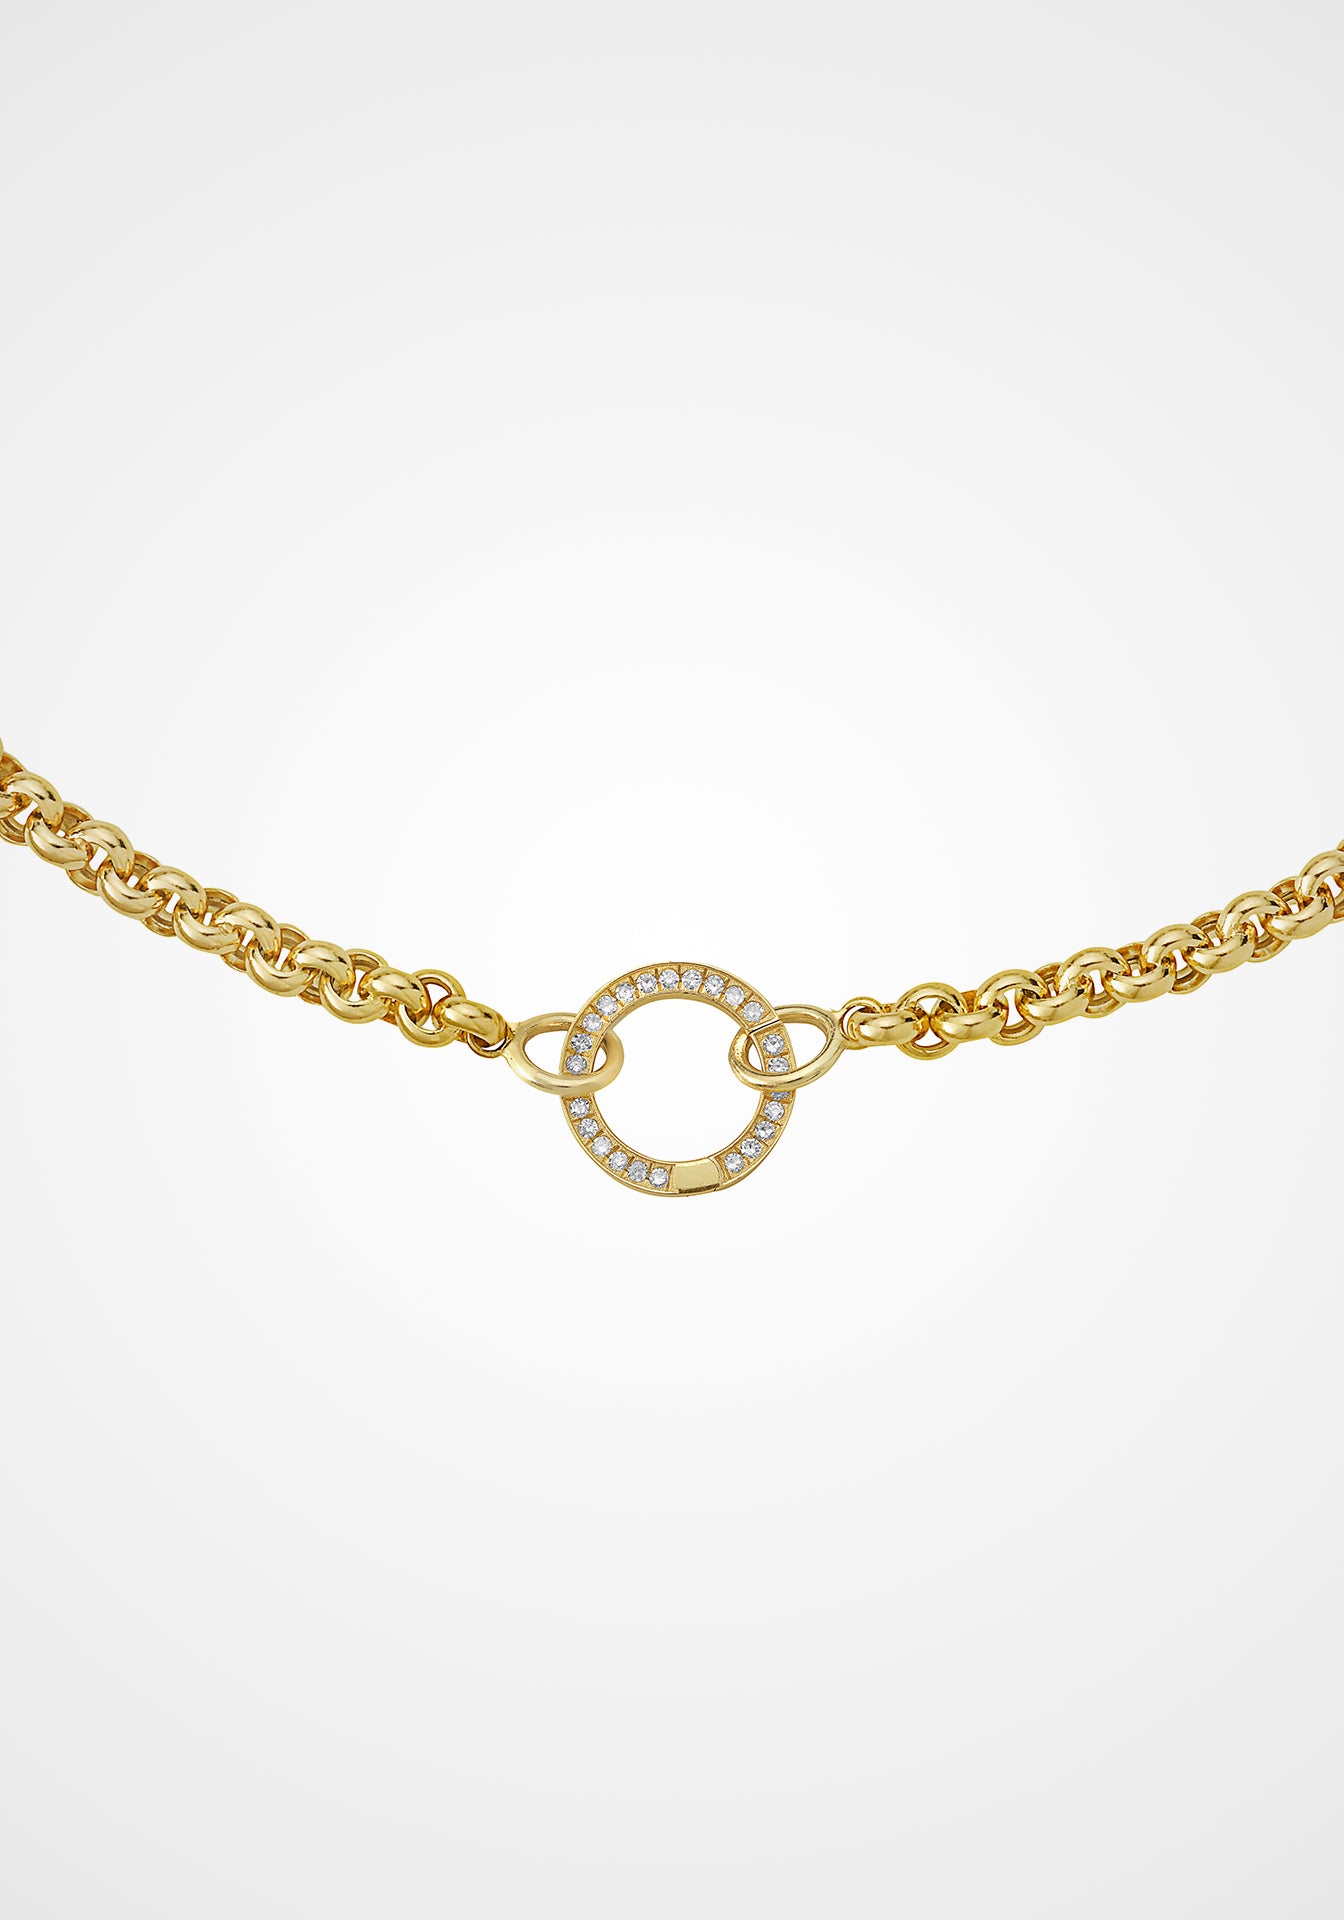 Rolo Link, 14K Yellow Gold Chain + Diamond Clicker Connector